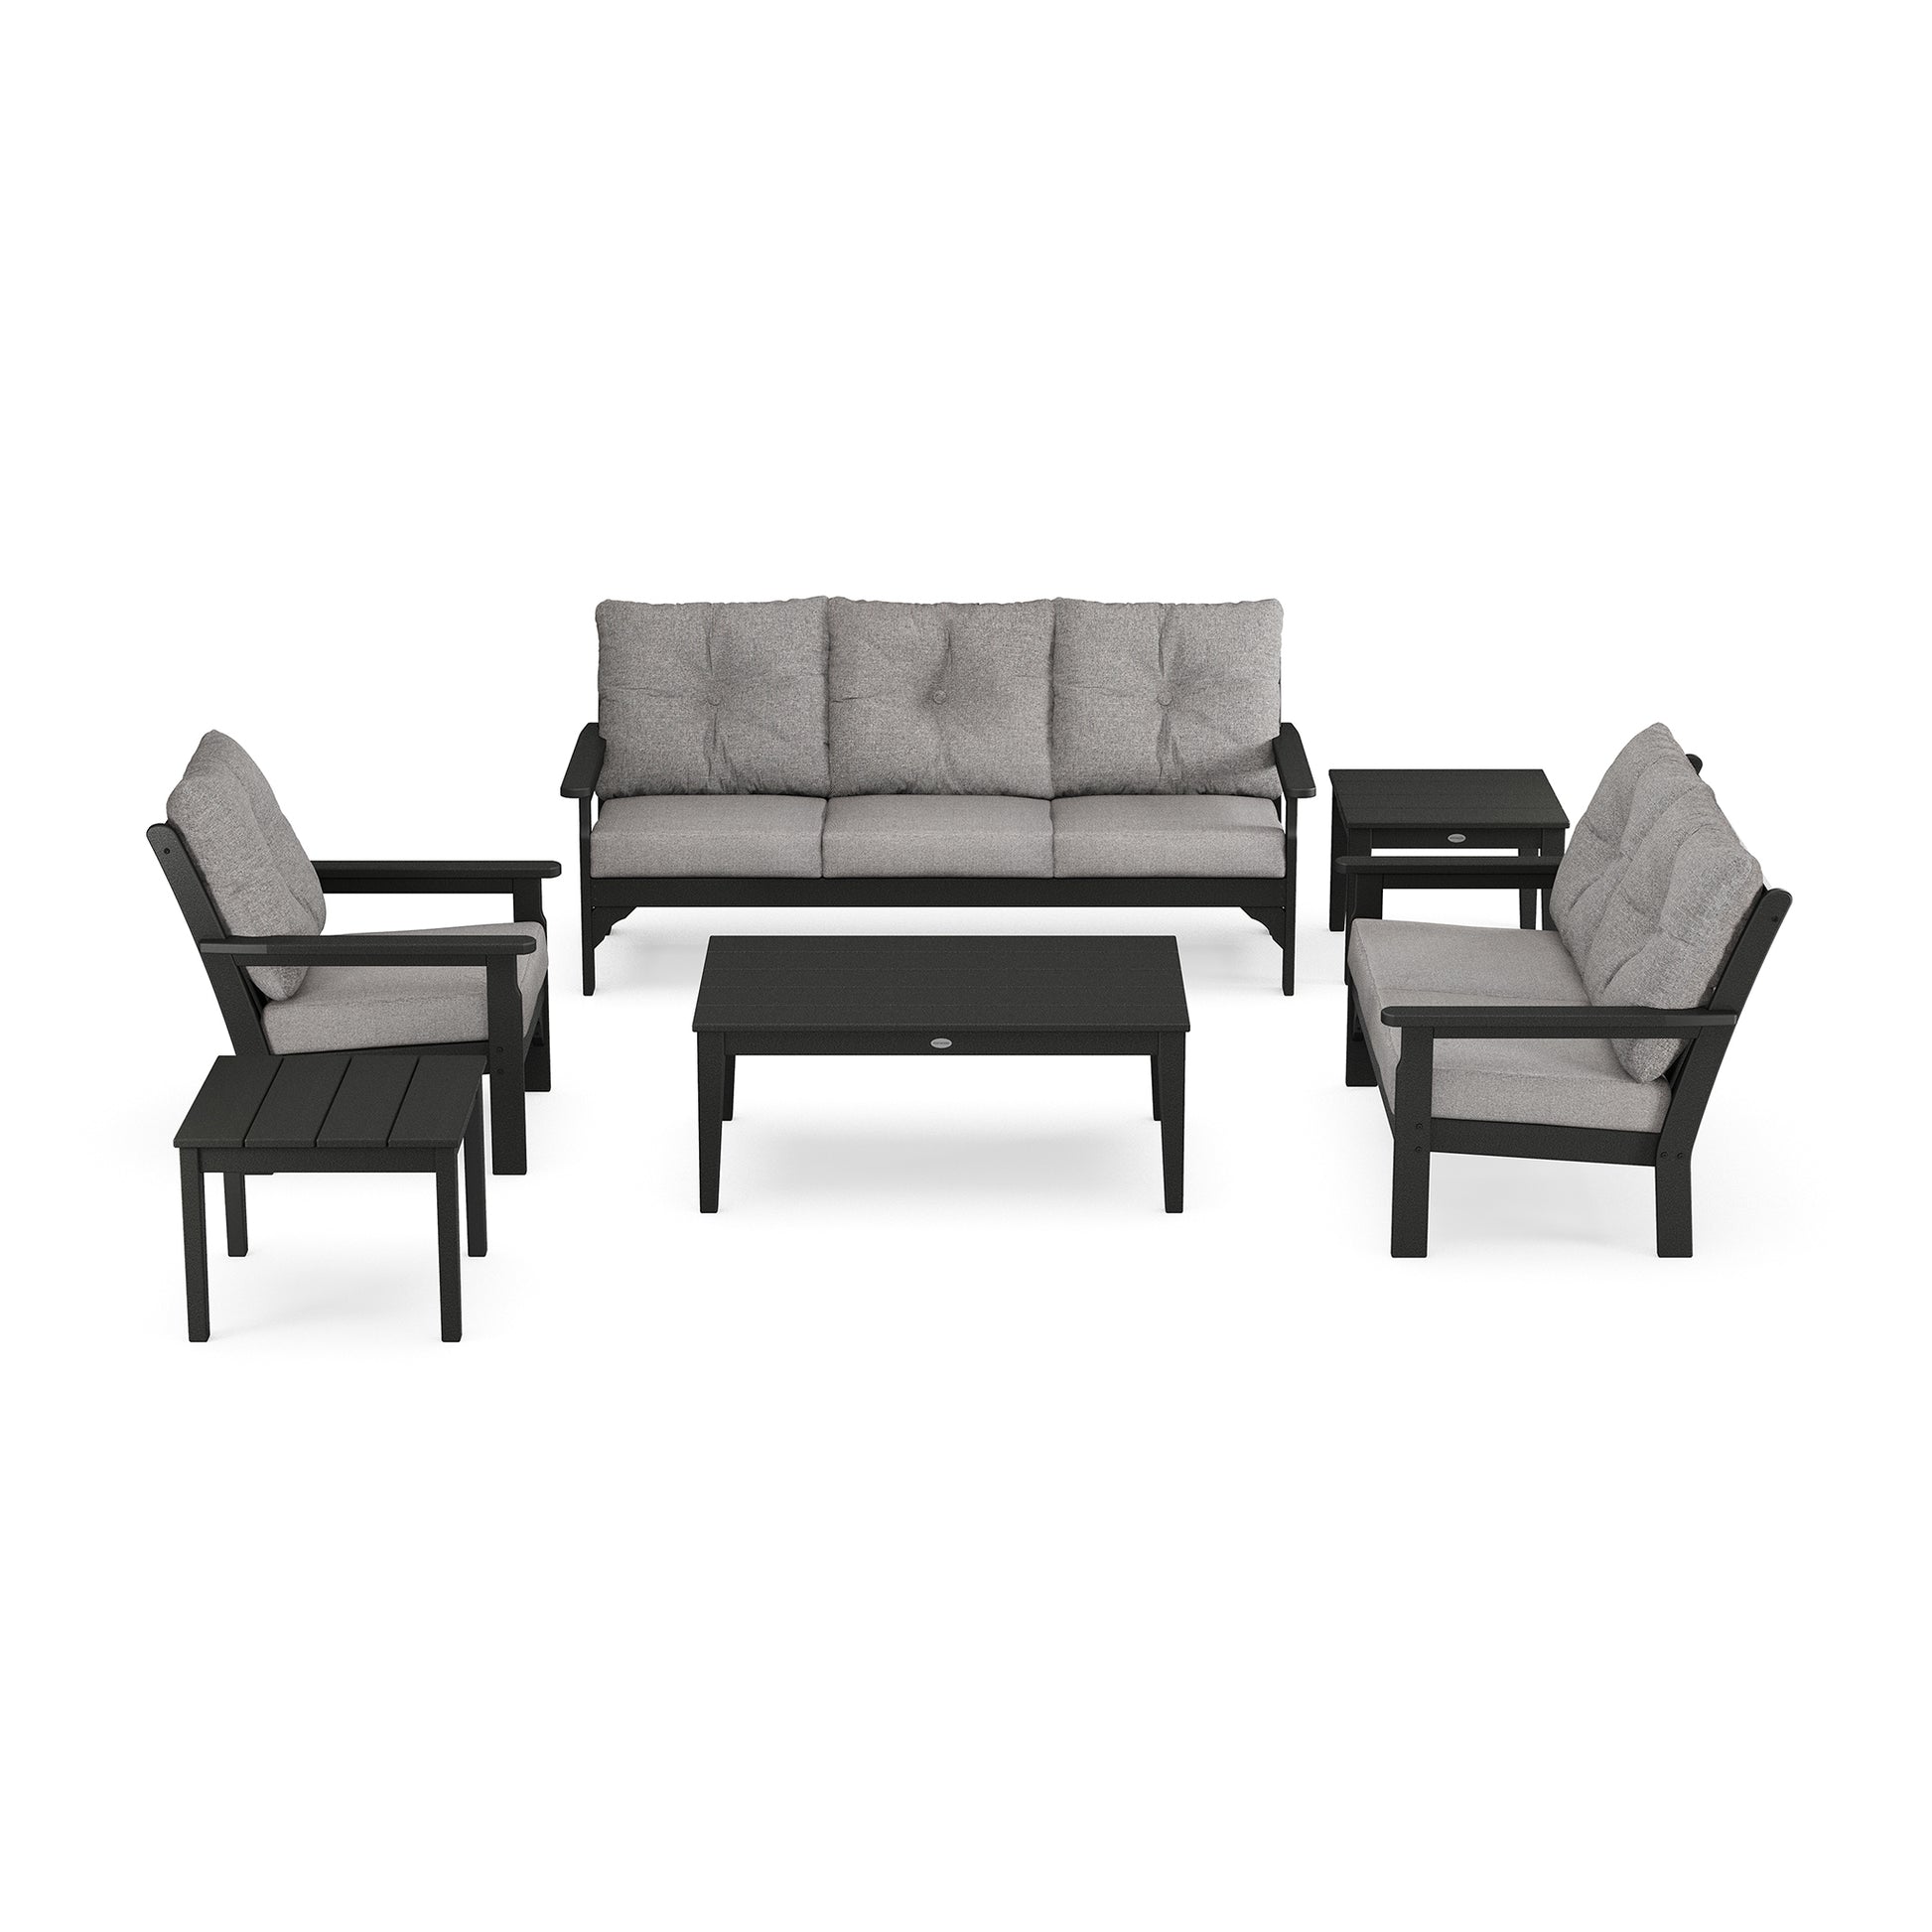 A modern POLYWOOD Vineyard 6-Piece Deep Seating Set, including a sofa with cushions, two armchairs with cushions, a coffee table, and a side table, all in a matching dark gray color scheme.